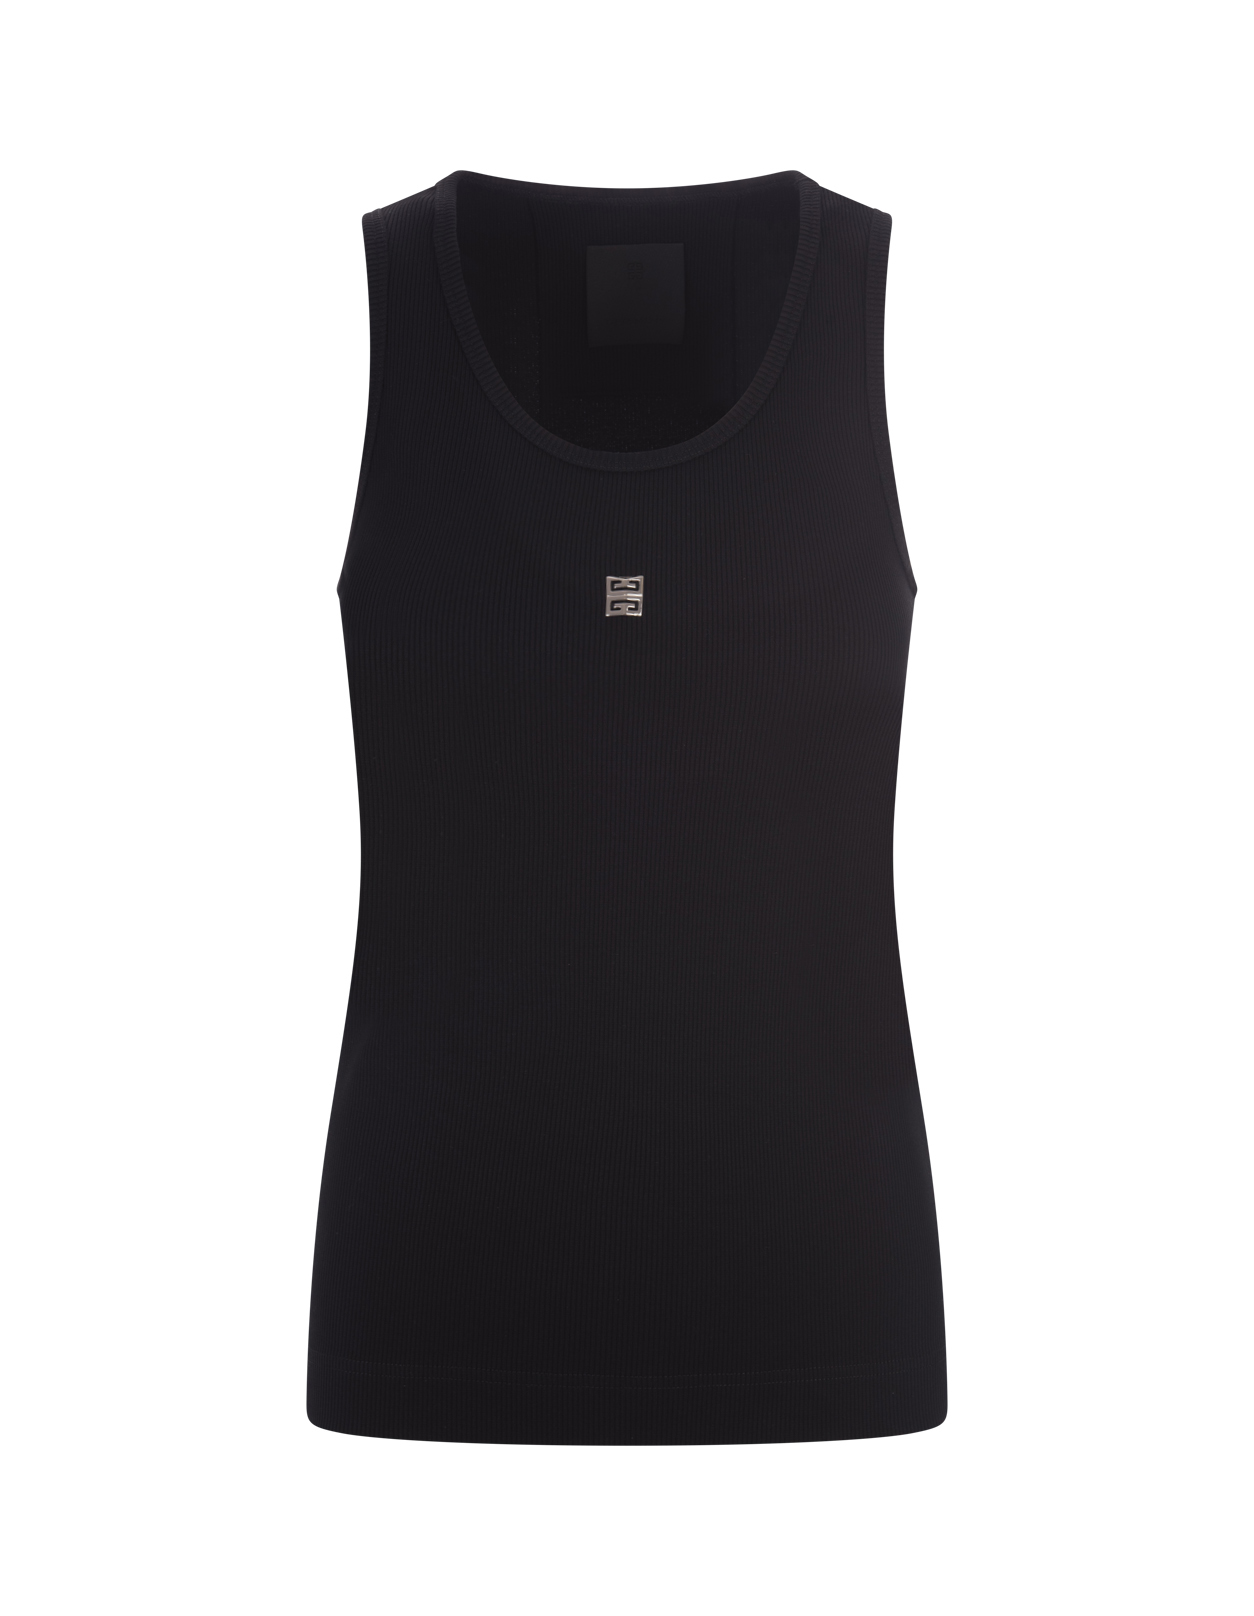 Top Nero Con Placca Logo GIVENCHY | BW70CH3YHY001